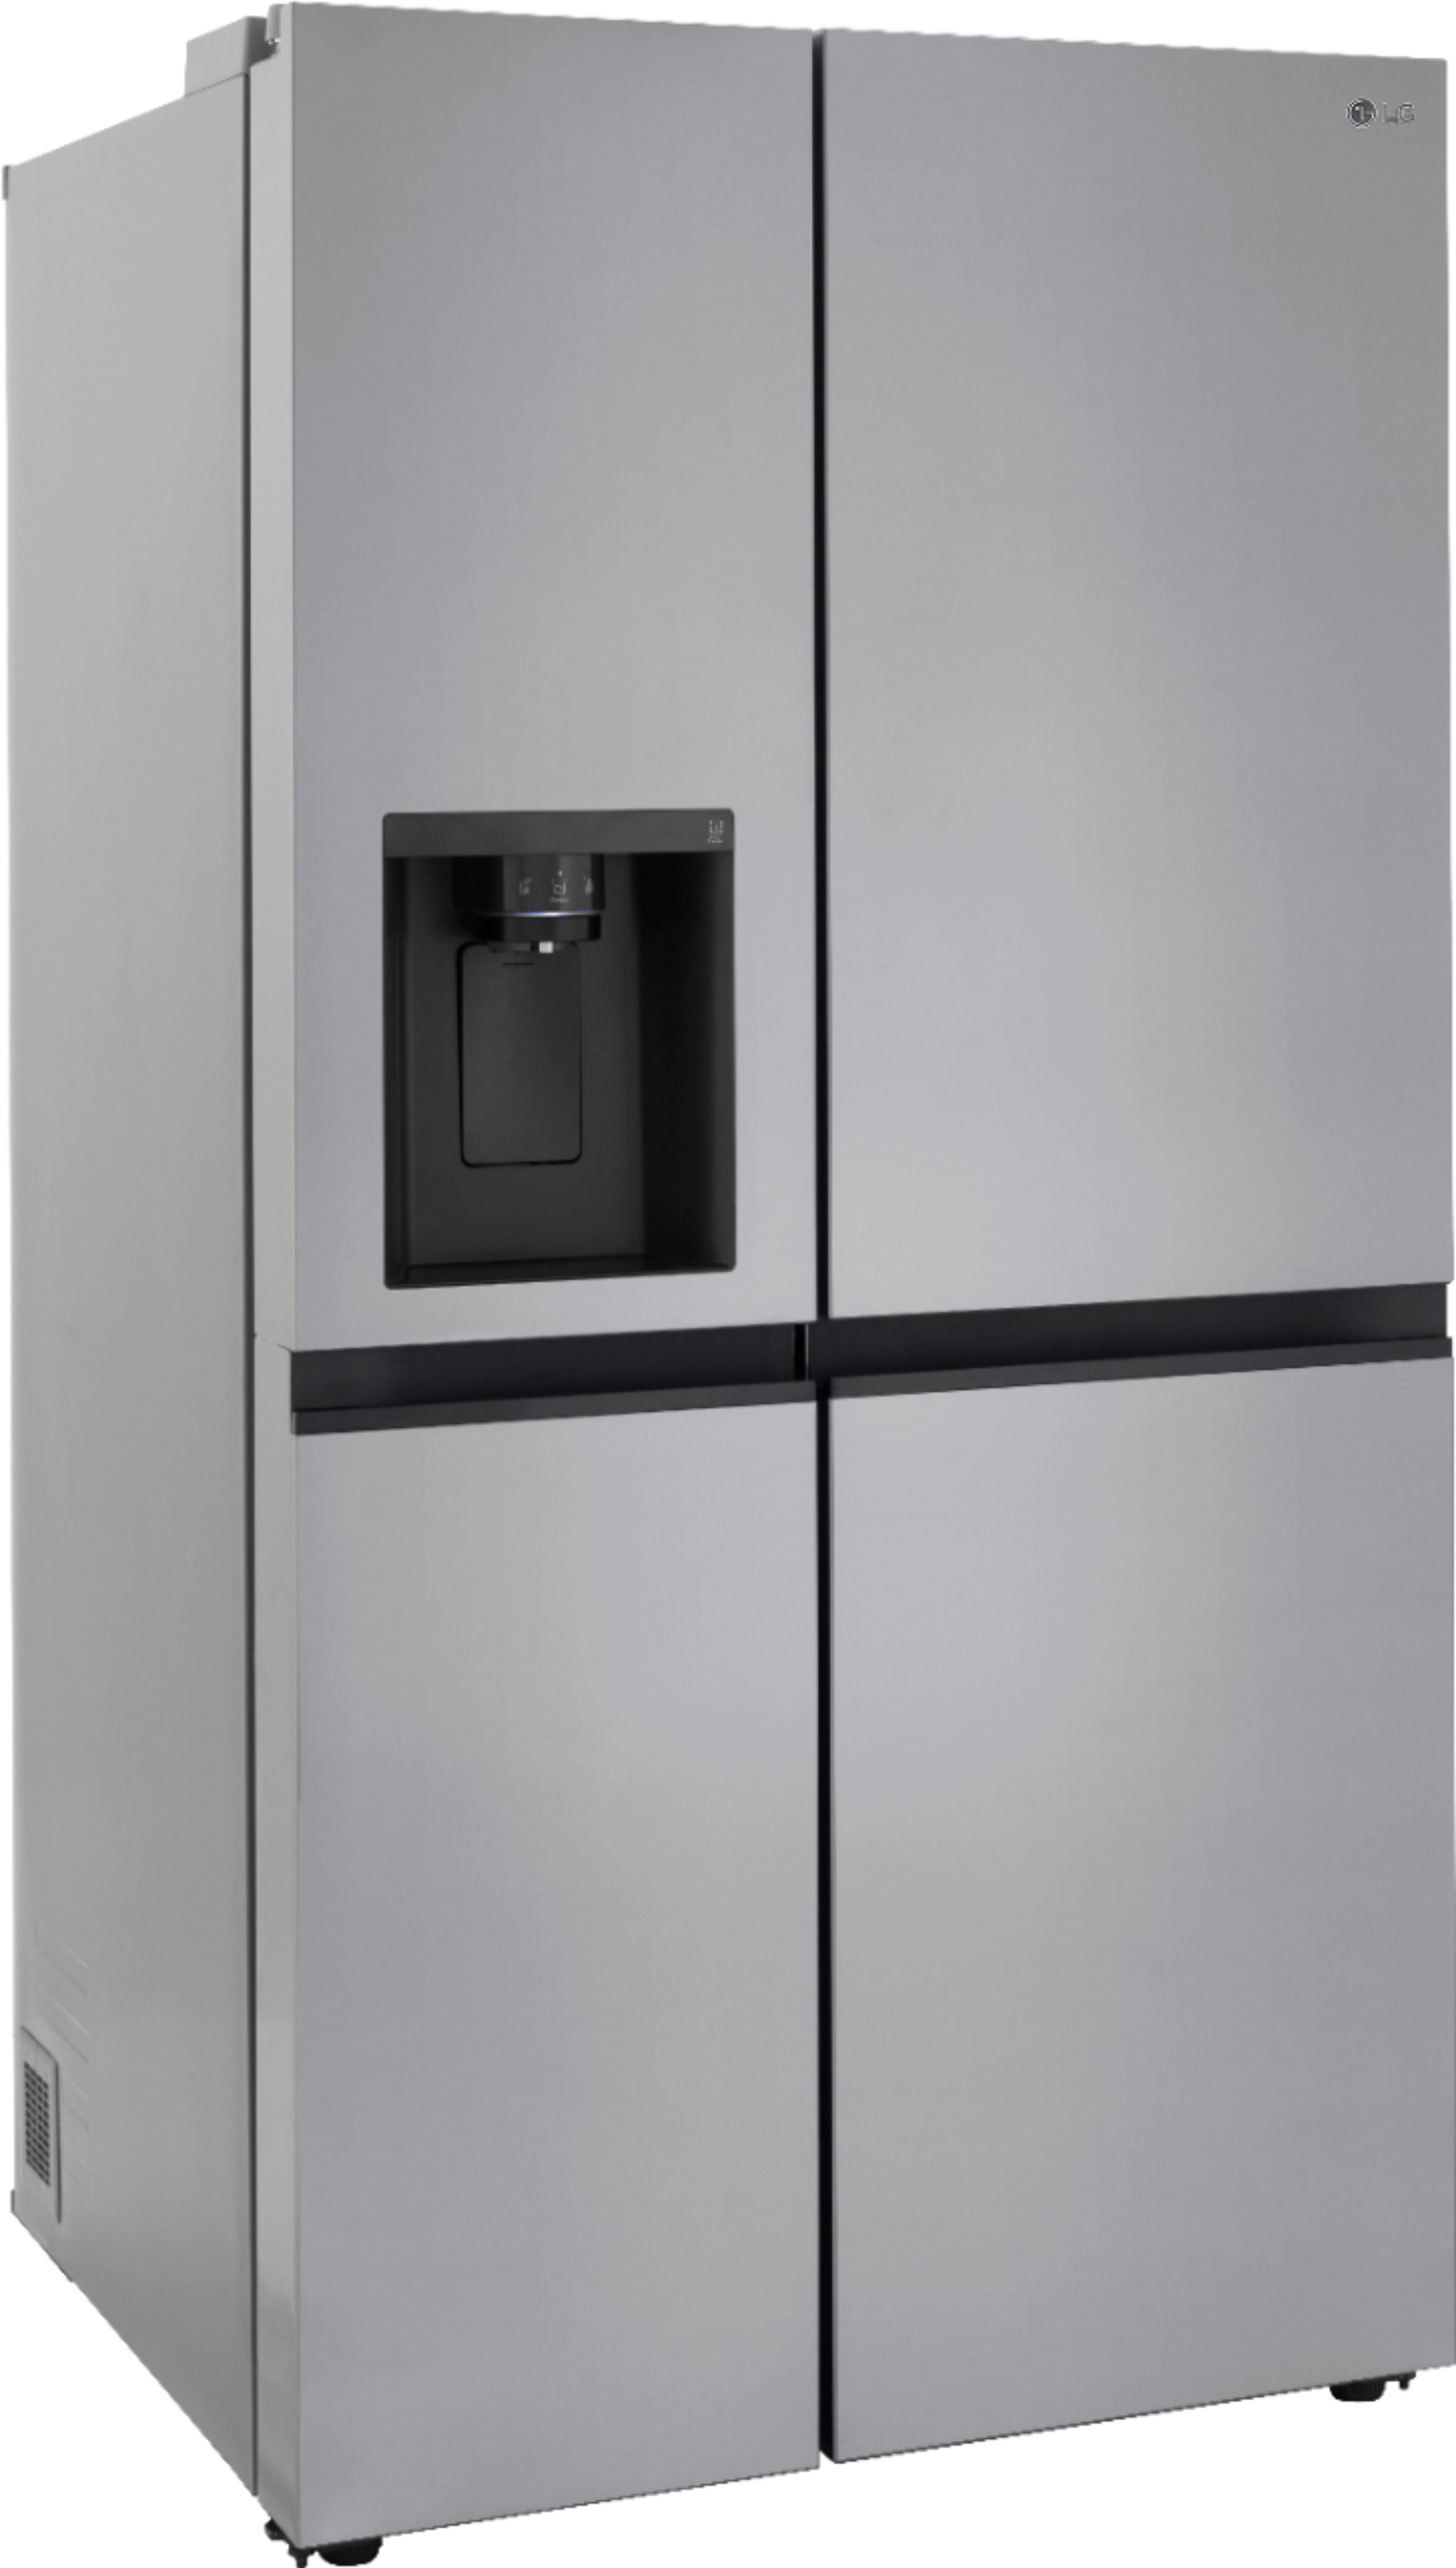 Angle View: KitchenAid - 23.8 Cu. Ft. French Door Counter-Depth Refrigerator - Black Stainless Steel